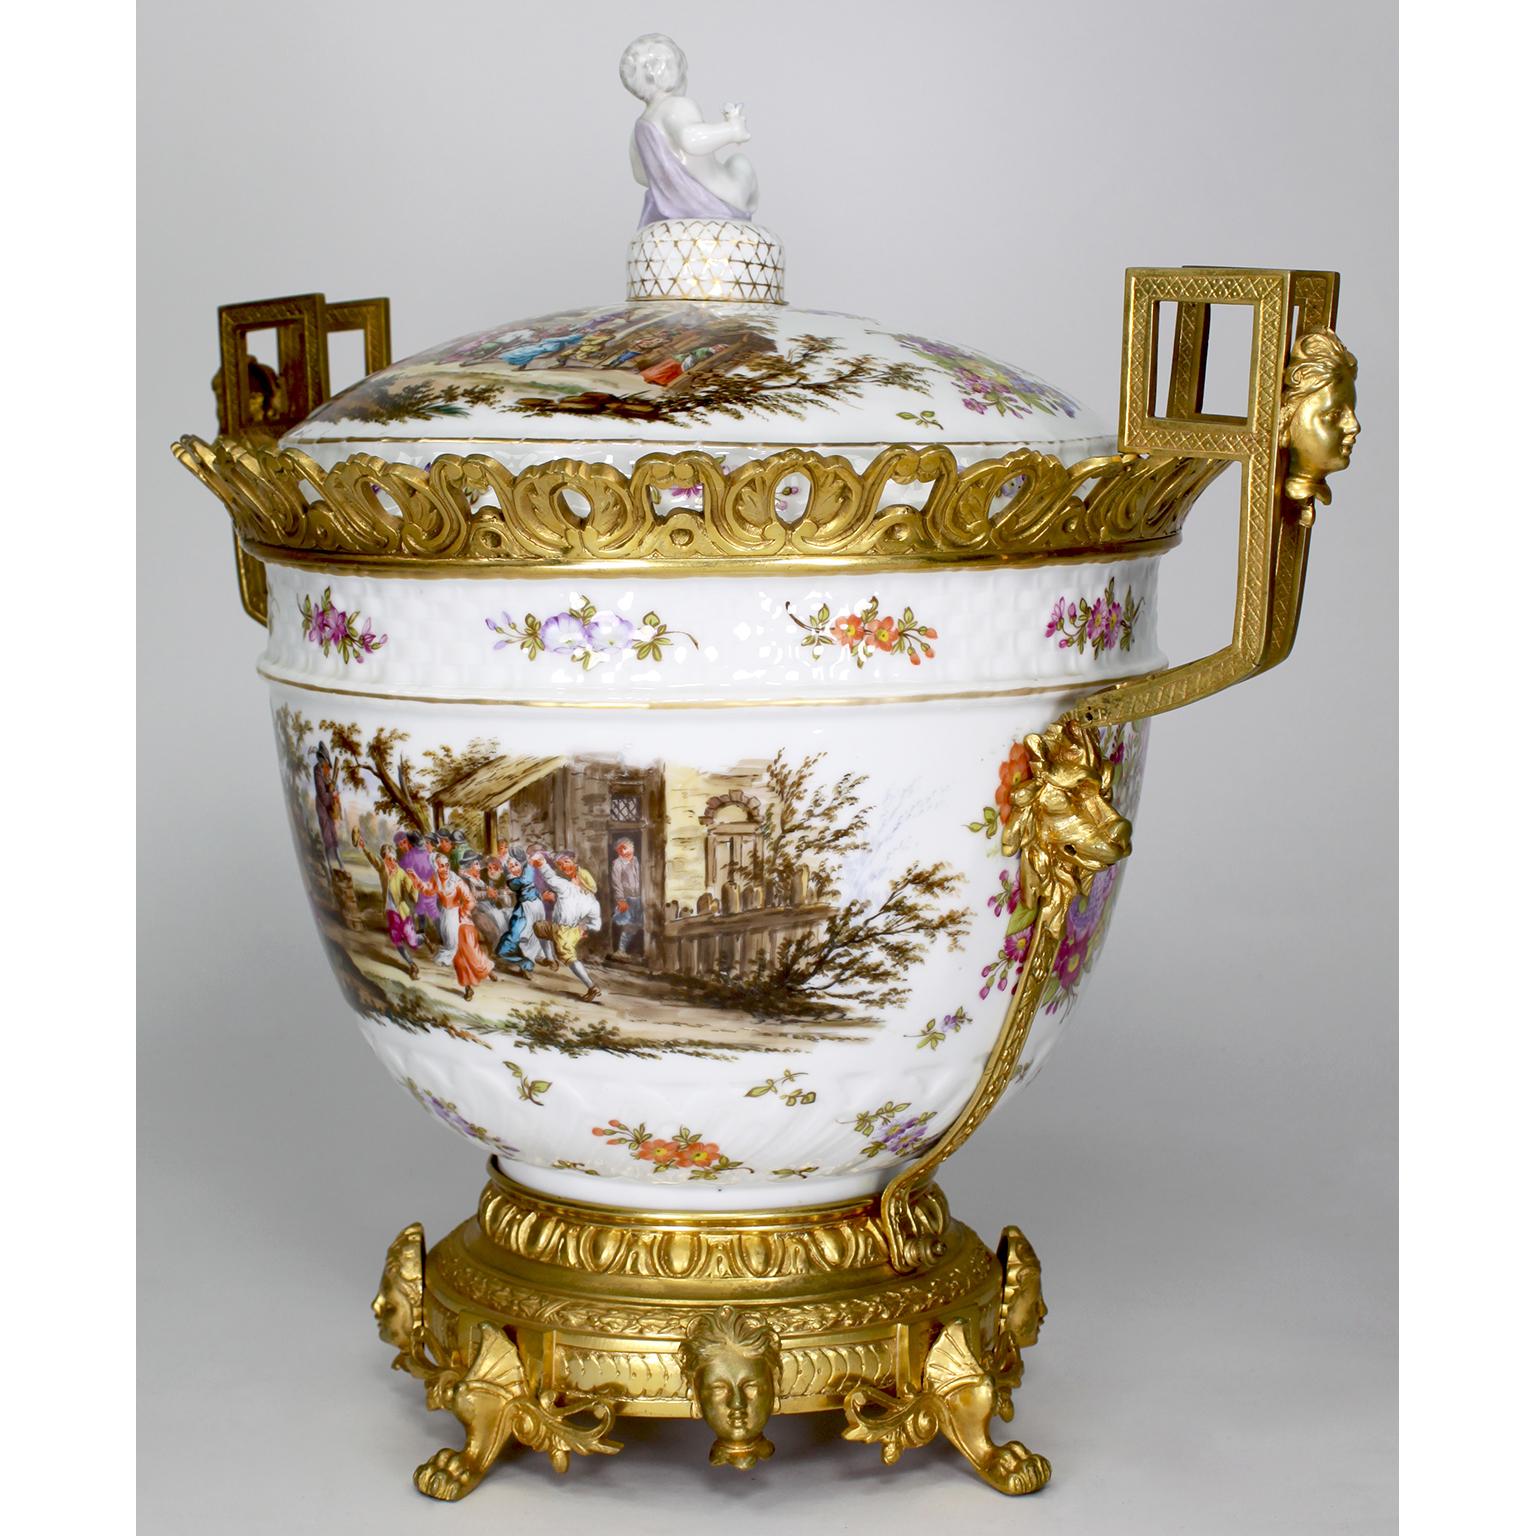 Large German Porcelain & Gilt-Bronze Mounted Urn with Cover in Manner of Meissen For Sale 2